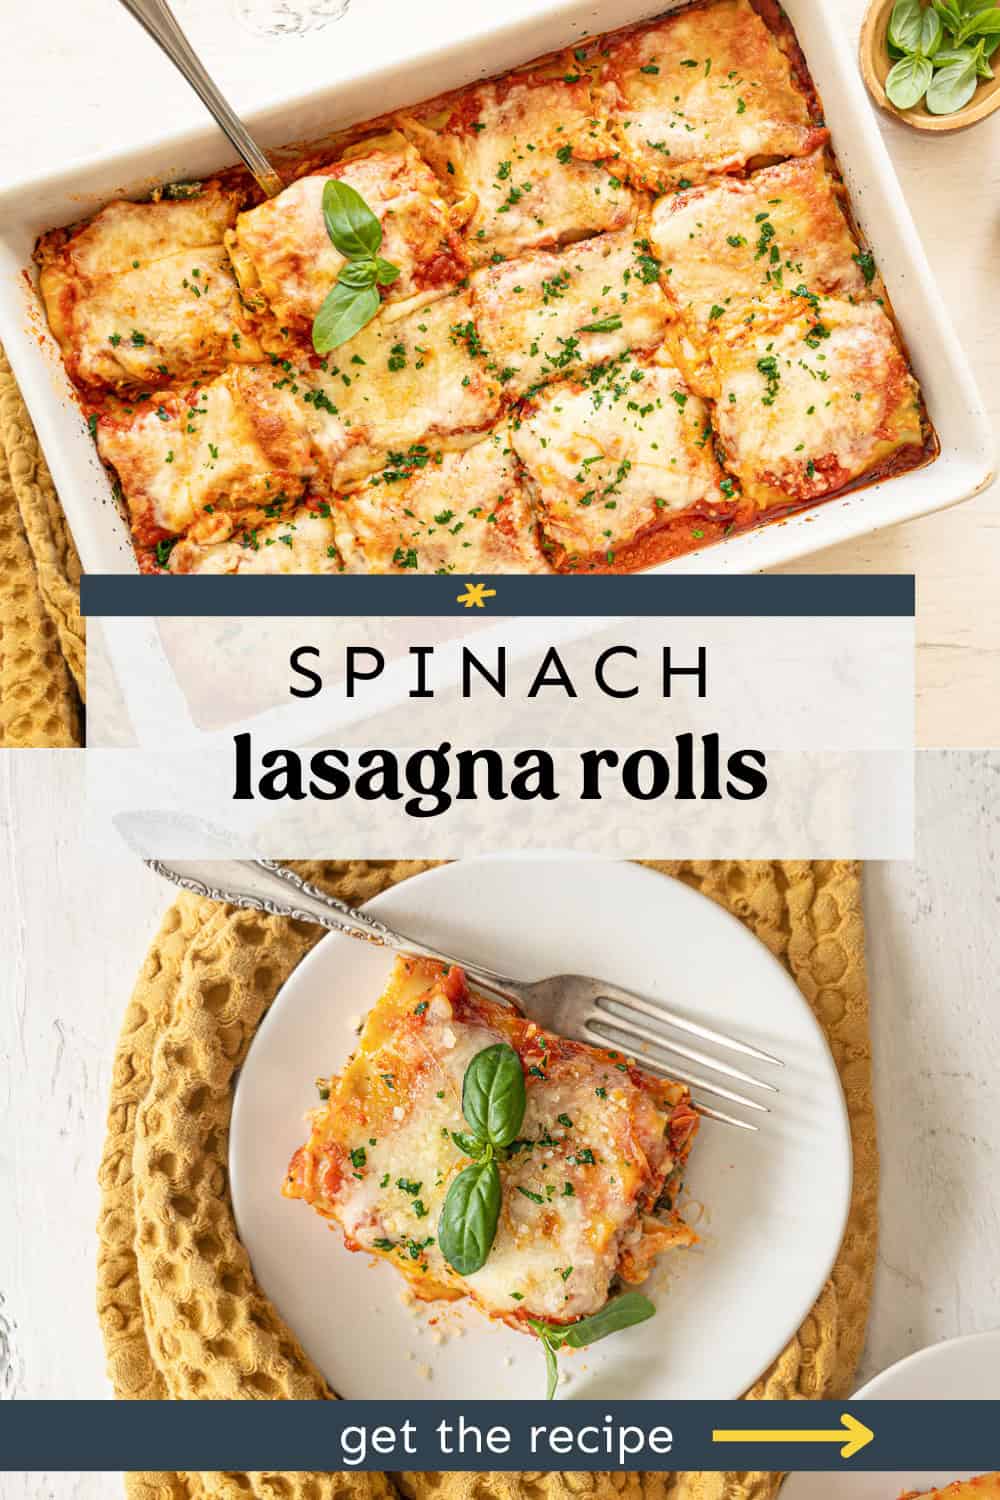 Top photo is of a 9x12 pan of spinach lasagna rolls, and the bottom has a single serving of a roll with fresh basil leaves on top.